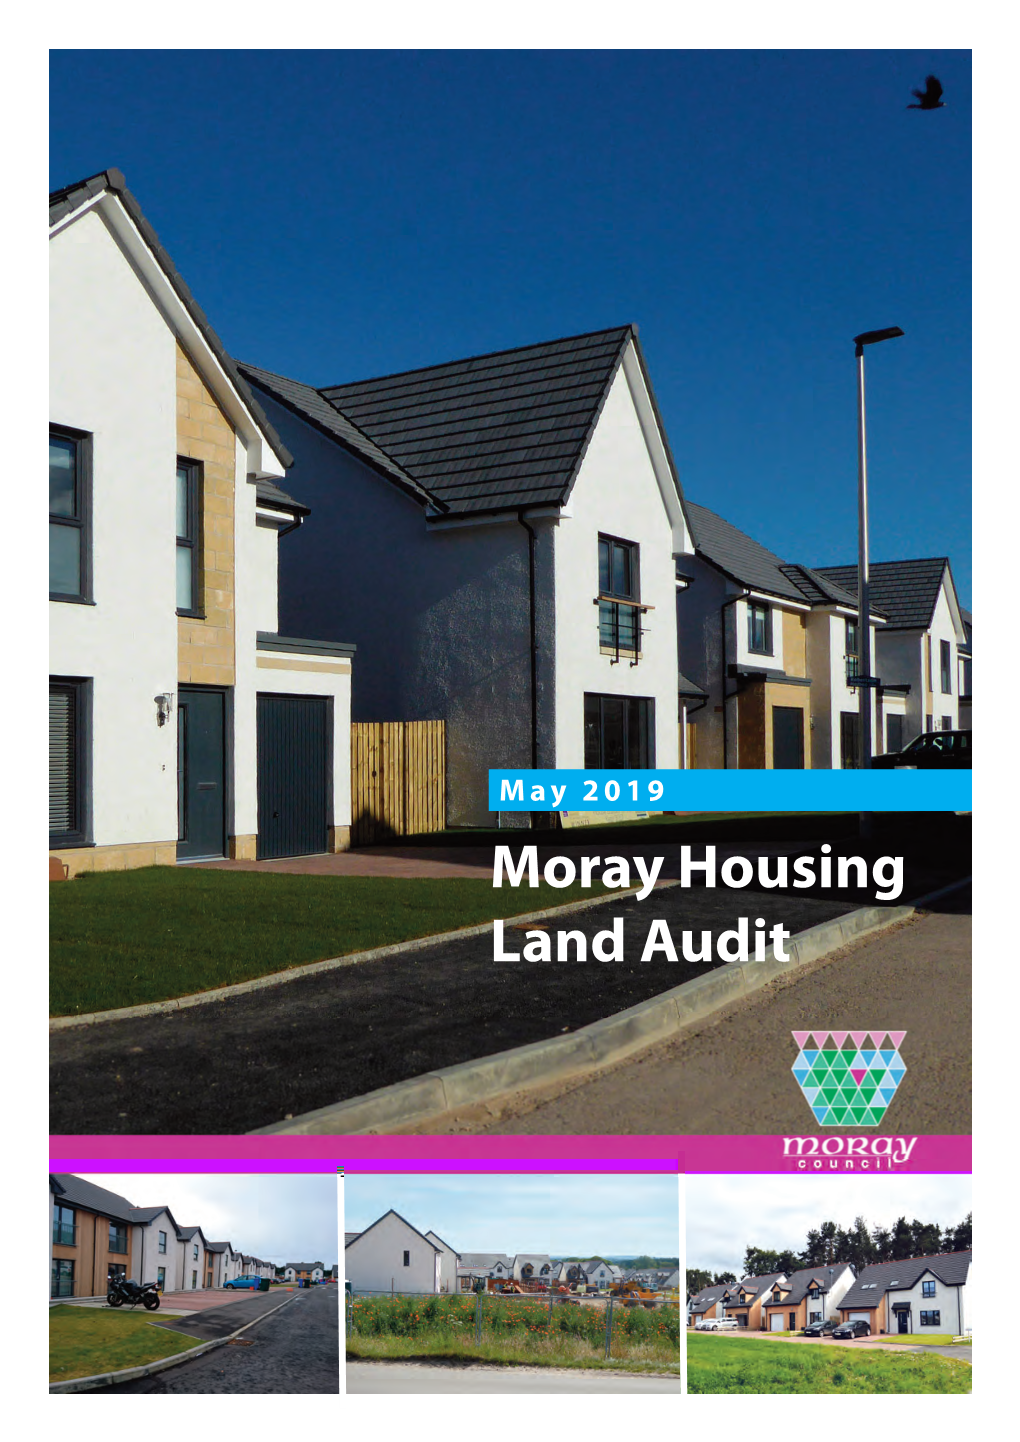 Moray Housing Land Audit Moray Towns and Local Housing Market Areas (LHMA)